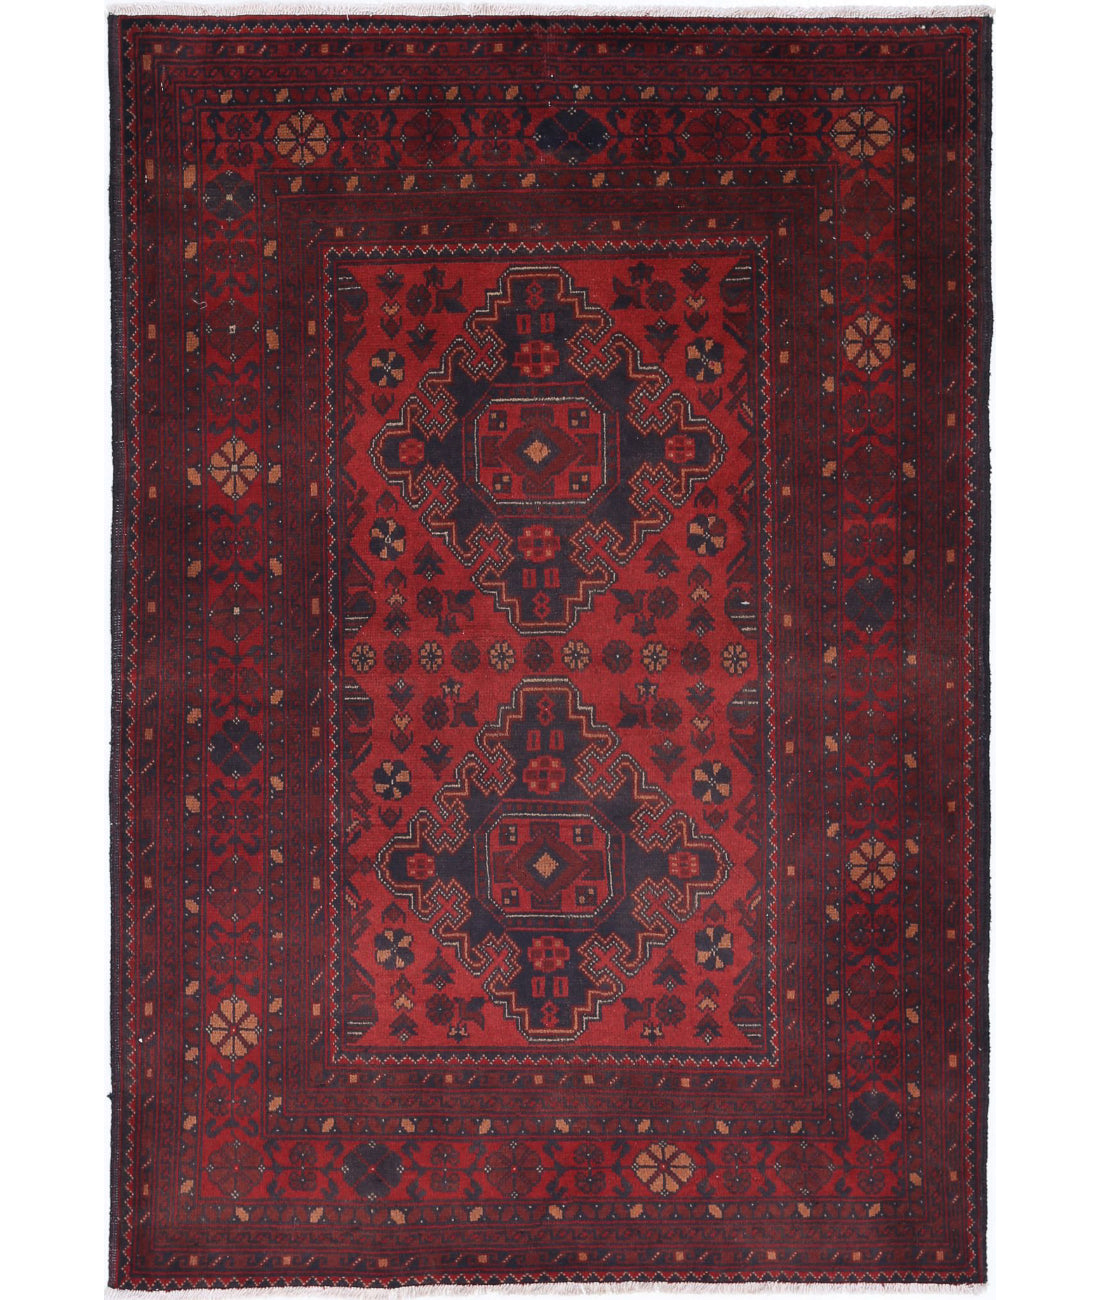 Afghan 3'3'' X 4'1'' Hand-Knotted Wool Rug 3'3'' x 4'1'' (98 X 123) / Red / N/A